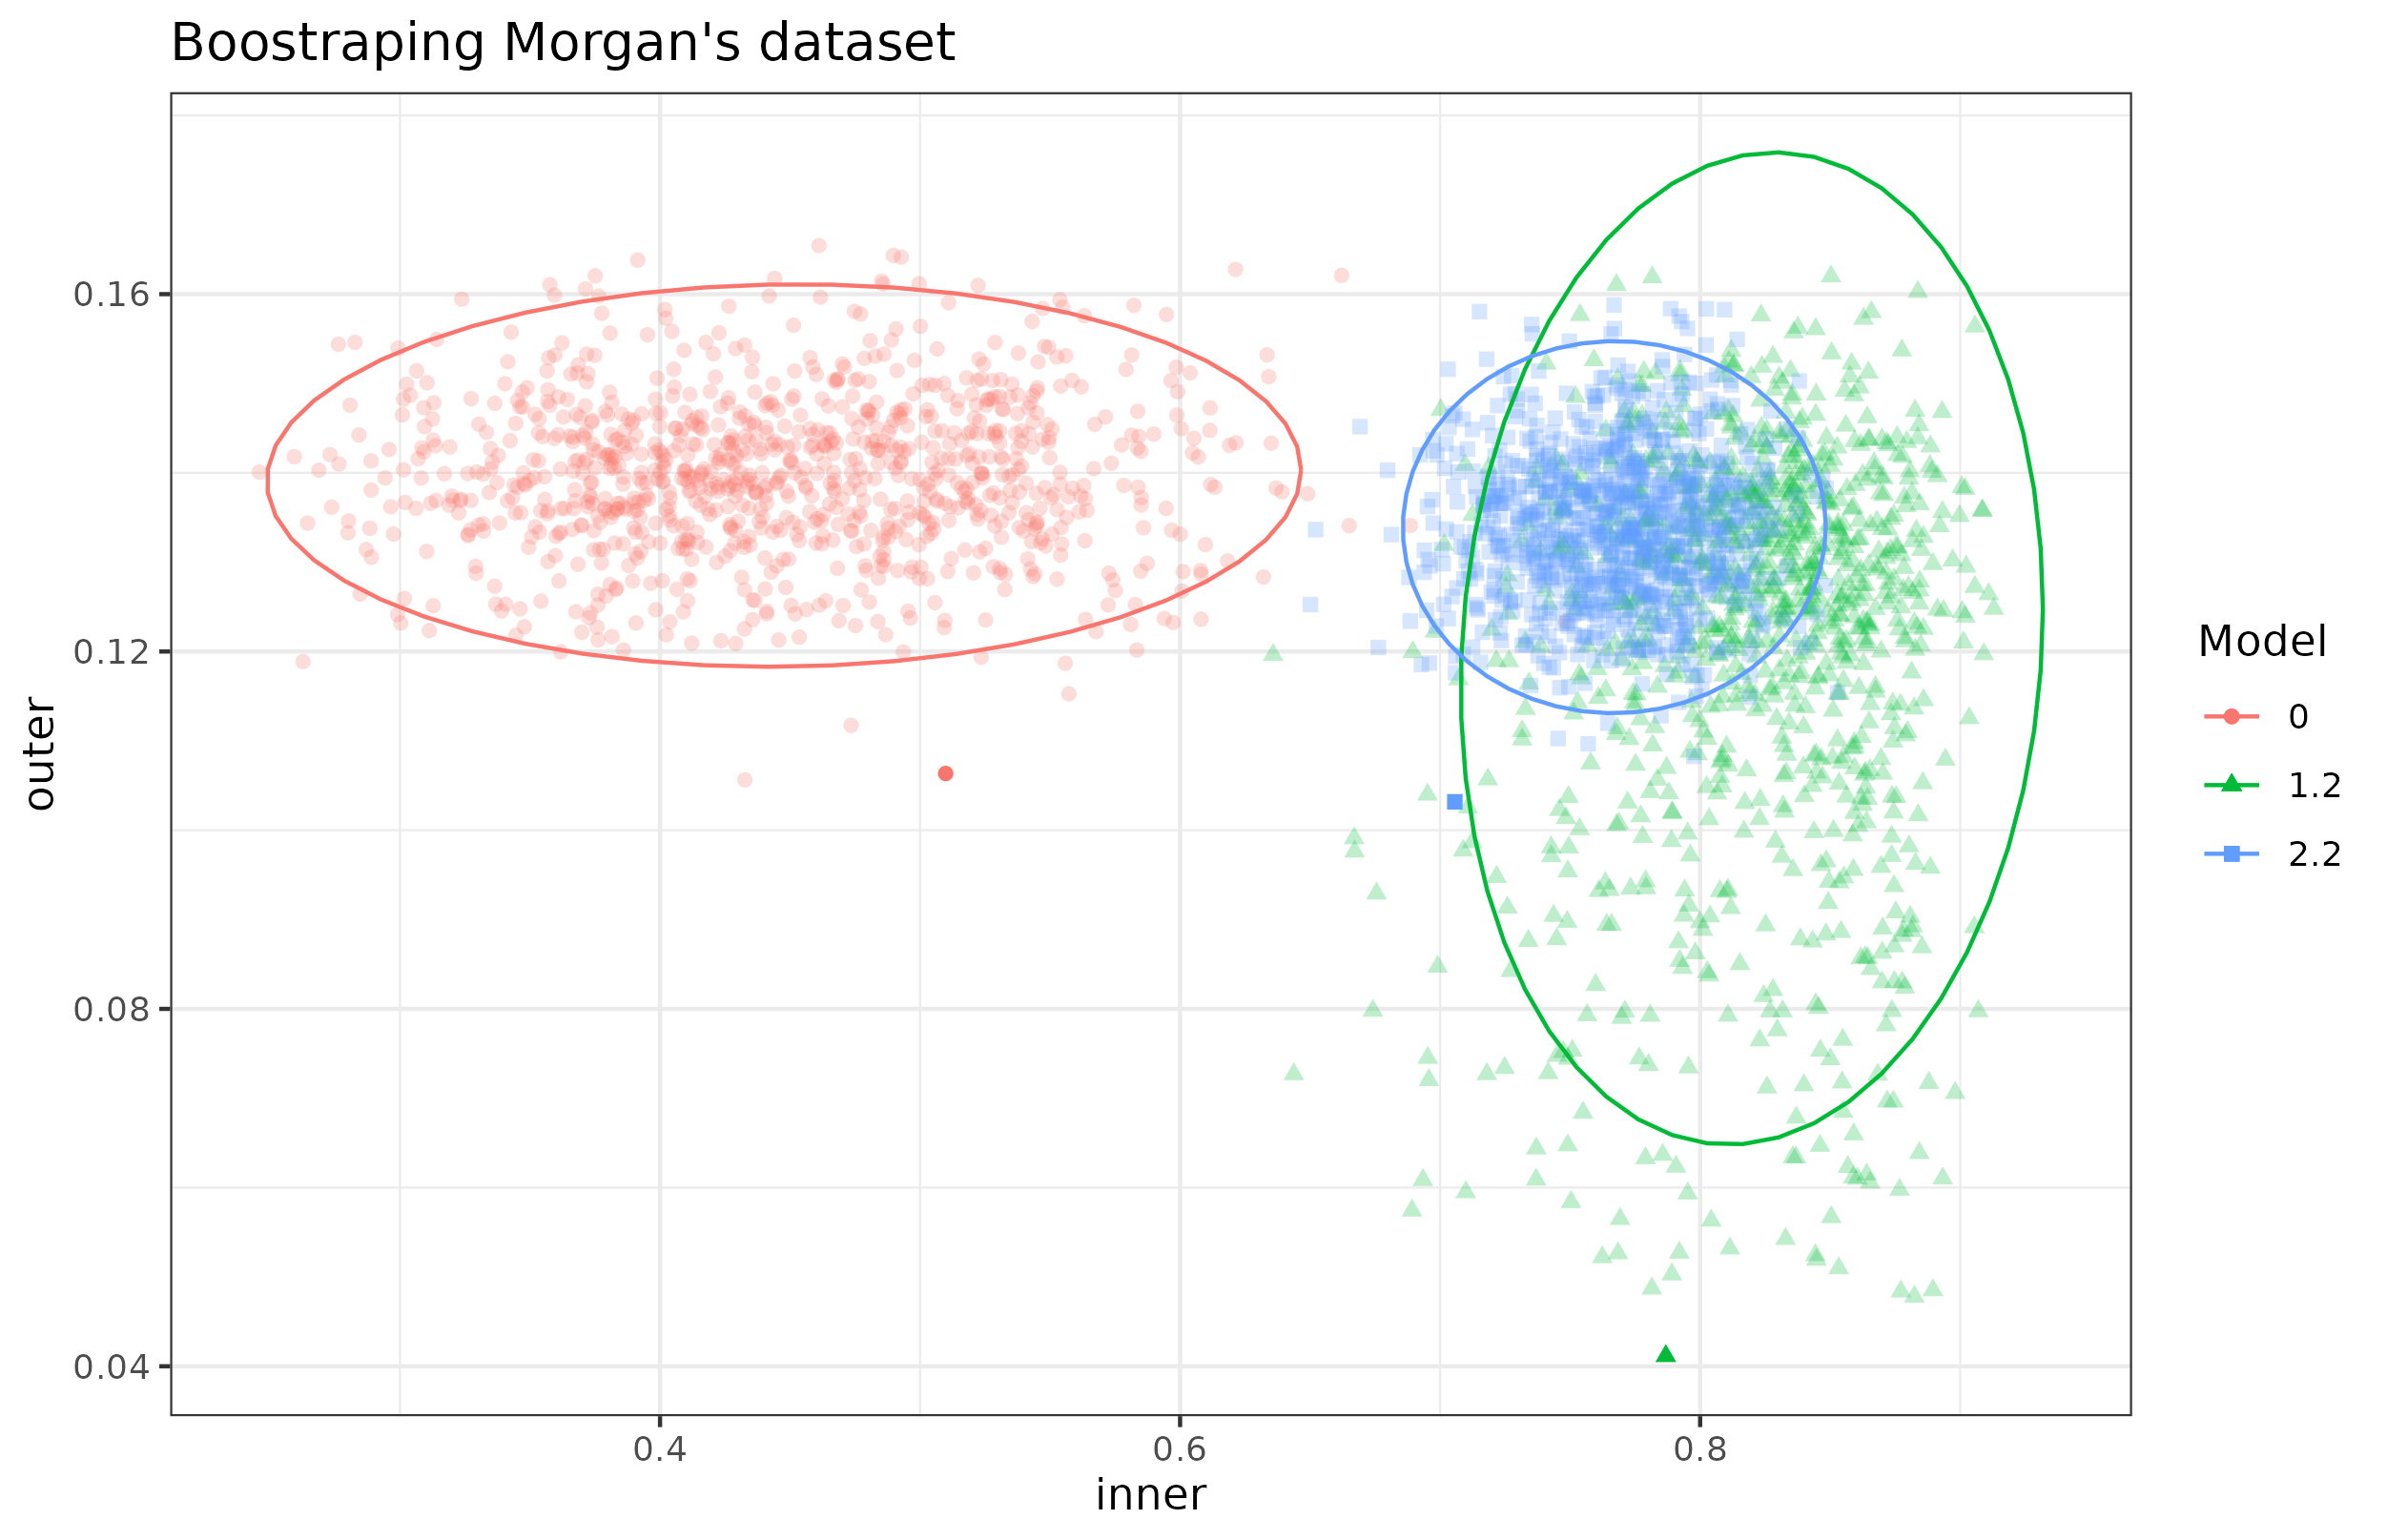 AVE scores of bootstrapped models from Morgan dataset. Inner and outer AVE scores of the bootstrapped models 0, 1.2 and 2.2 on the Morgan dataset. Model 0 does not have sample data. Model 1.2 has microbiome, transcriptome and sample data in a single block and model 2.2 has microbiome, transcriptome and the sample data split in several blocks. Model 2.2 shows less variance than all models but lower inner values than model 1.2. Each point represents a bootstrapped sample (colored by model used). The dispersion is shown by the ellipses.